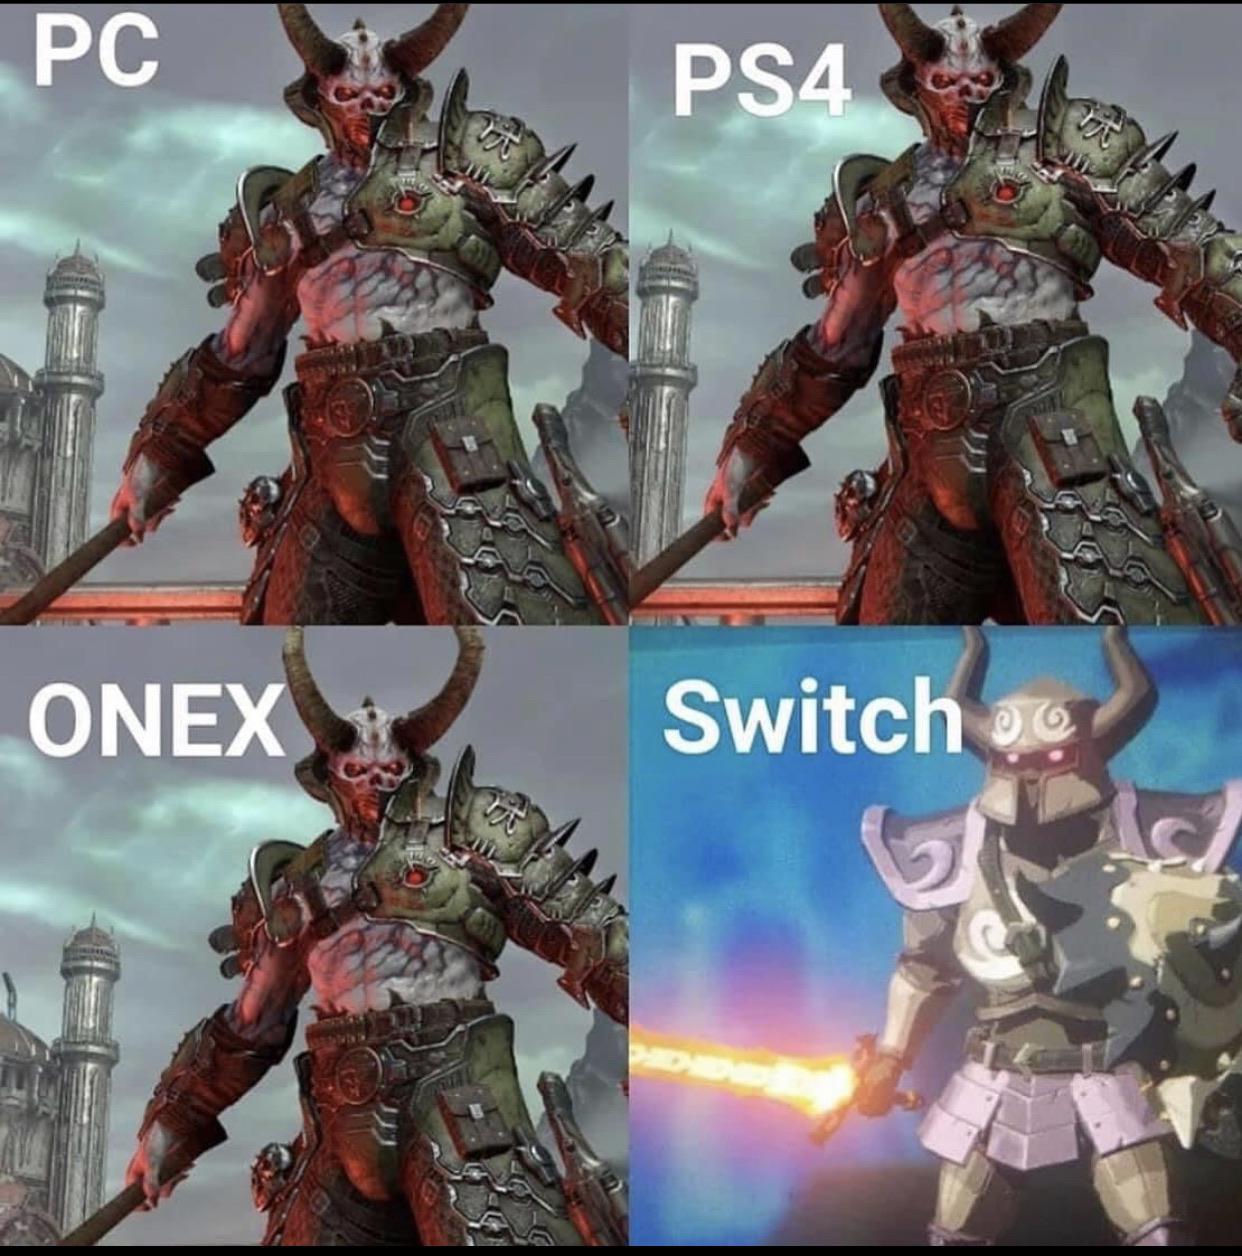 funny gaming memes - doom eternal screens - Pc PS4 Onex Switch o